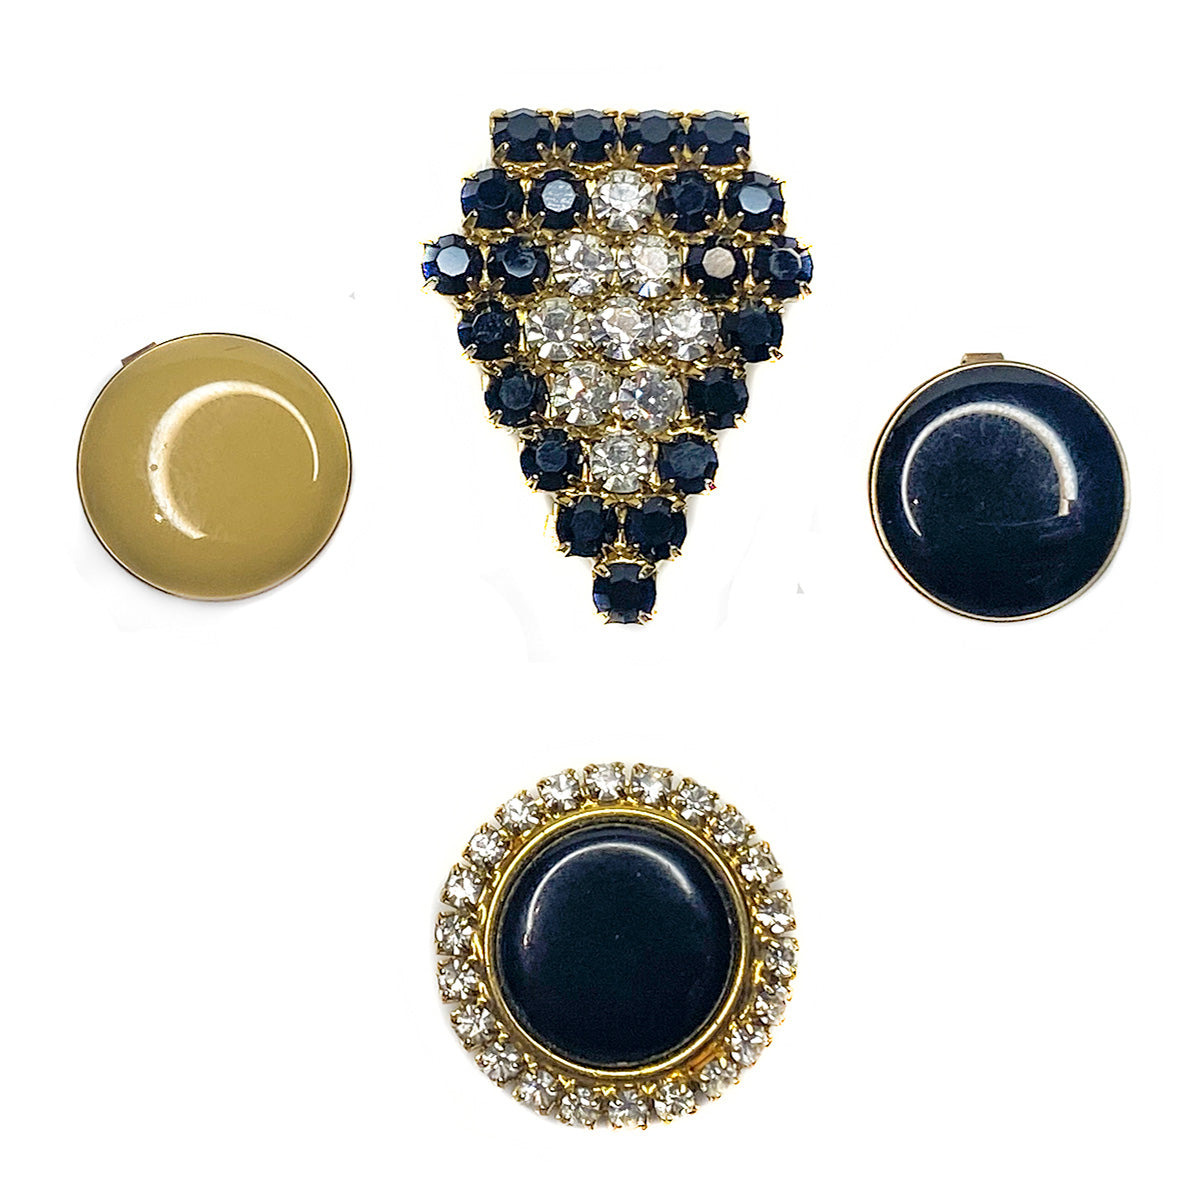 Crystal and Enamel Button Covers Set